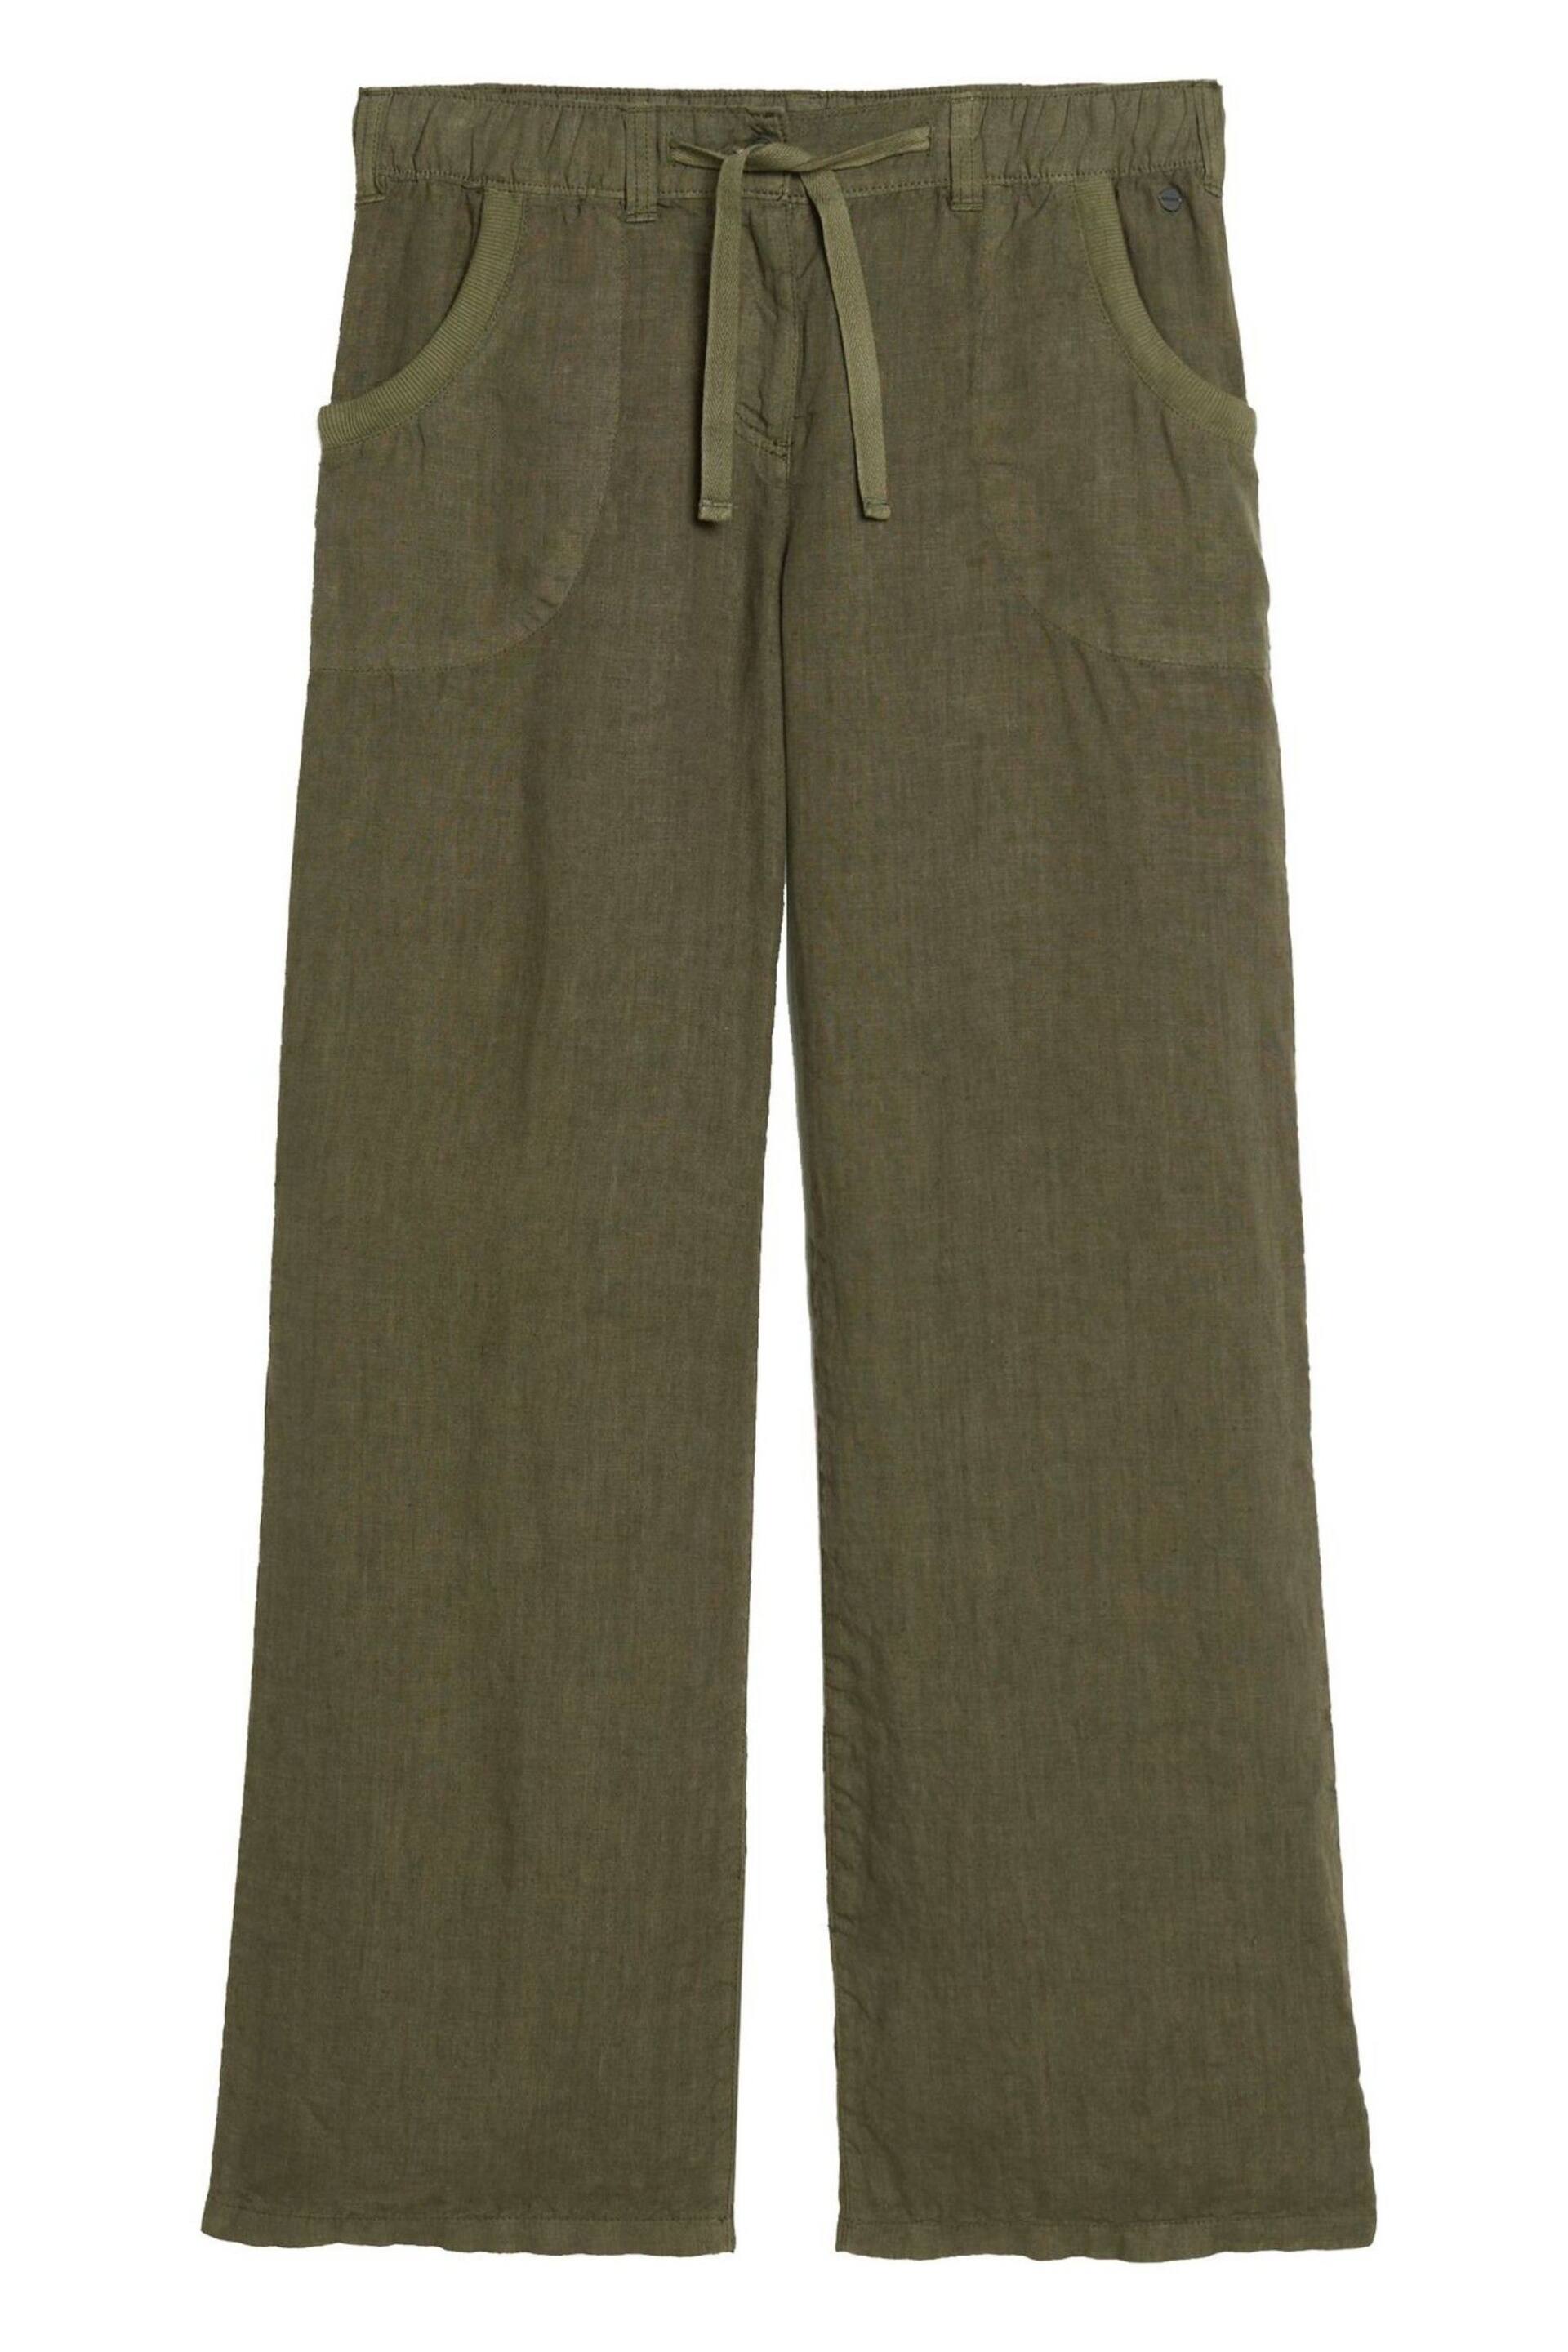 Superdry Green Linen Low Rise Trousers - Image 4 of 6